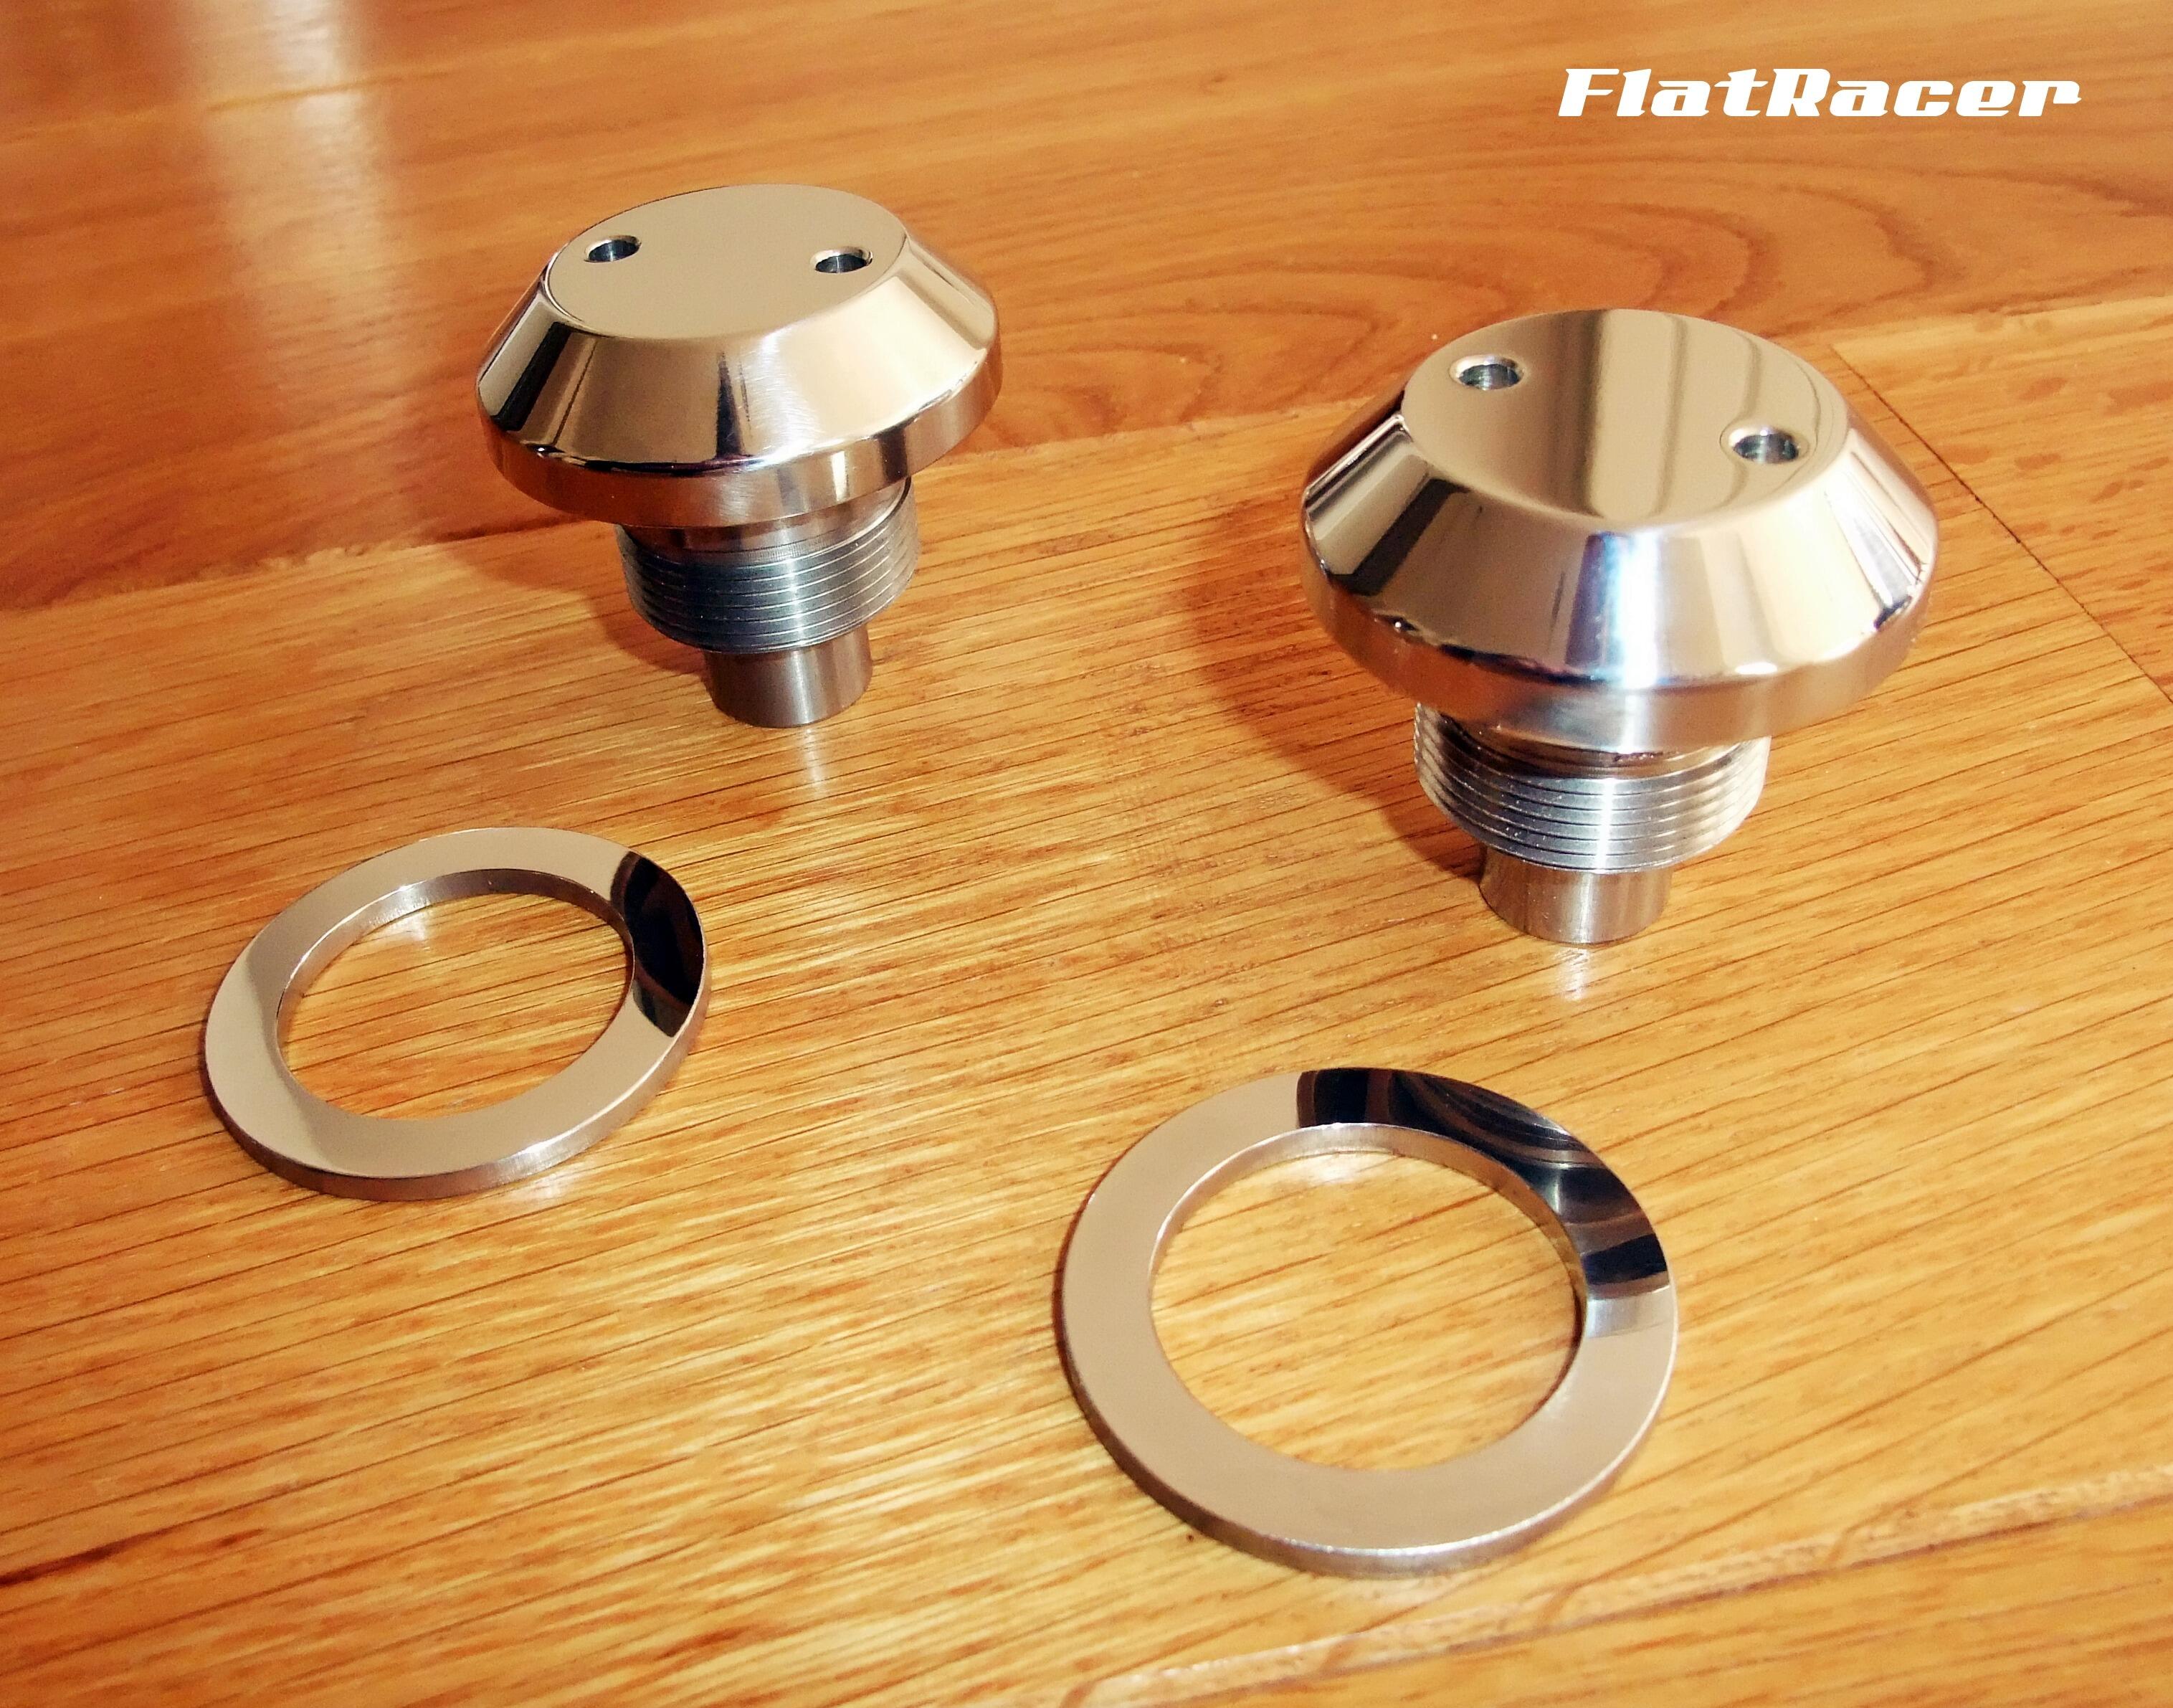 FlatRacer BMW /5 , /6 & /7 (69-84) s/s fork top nut guides, washers & caps - 31421238904 + 31421240179 + 31421238909